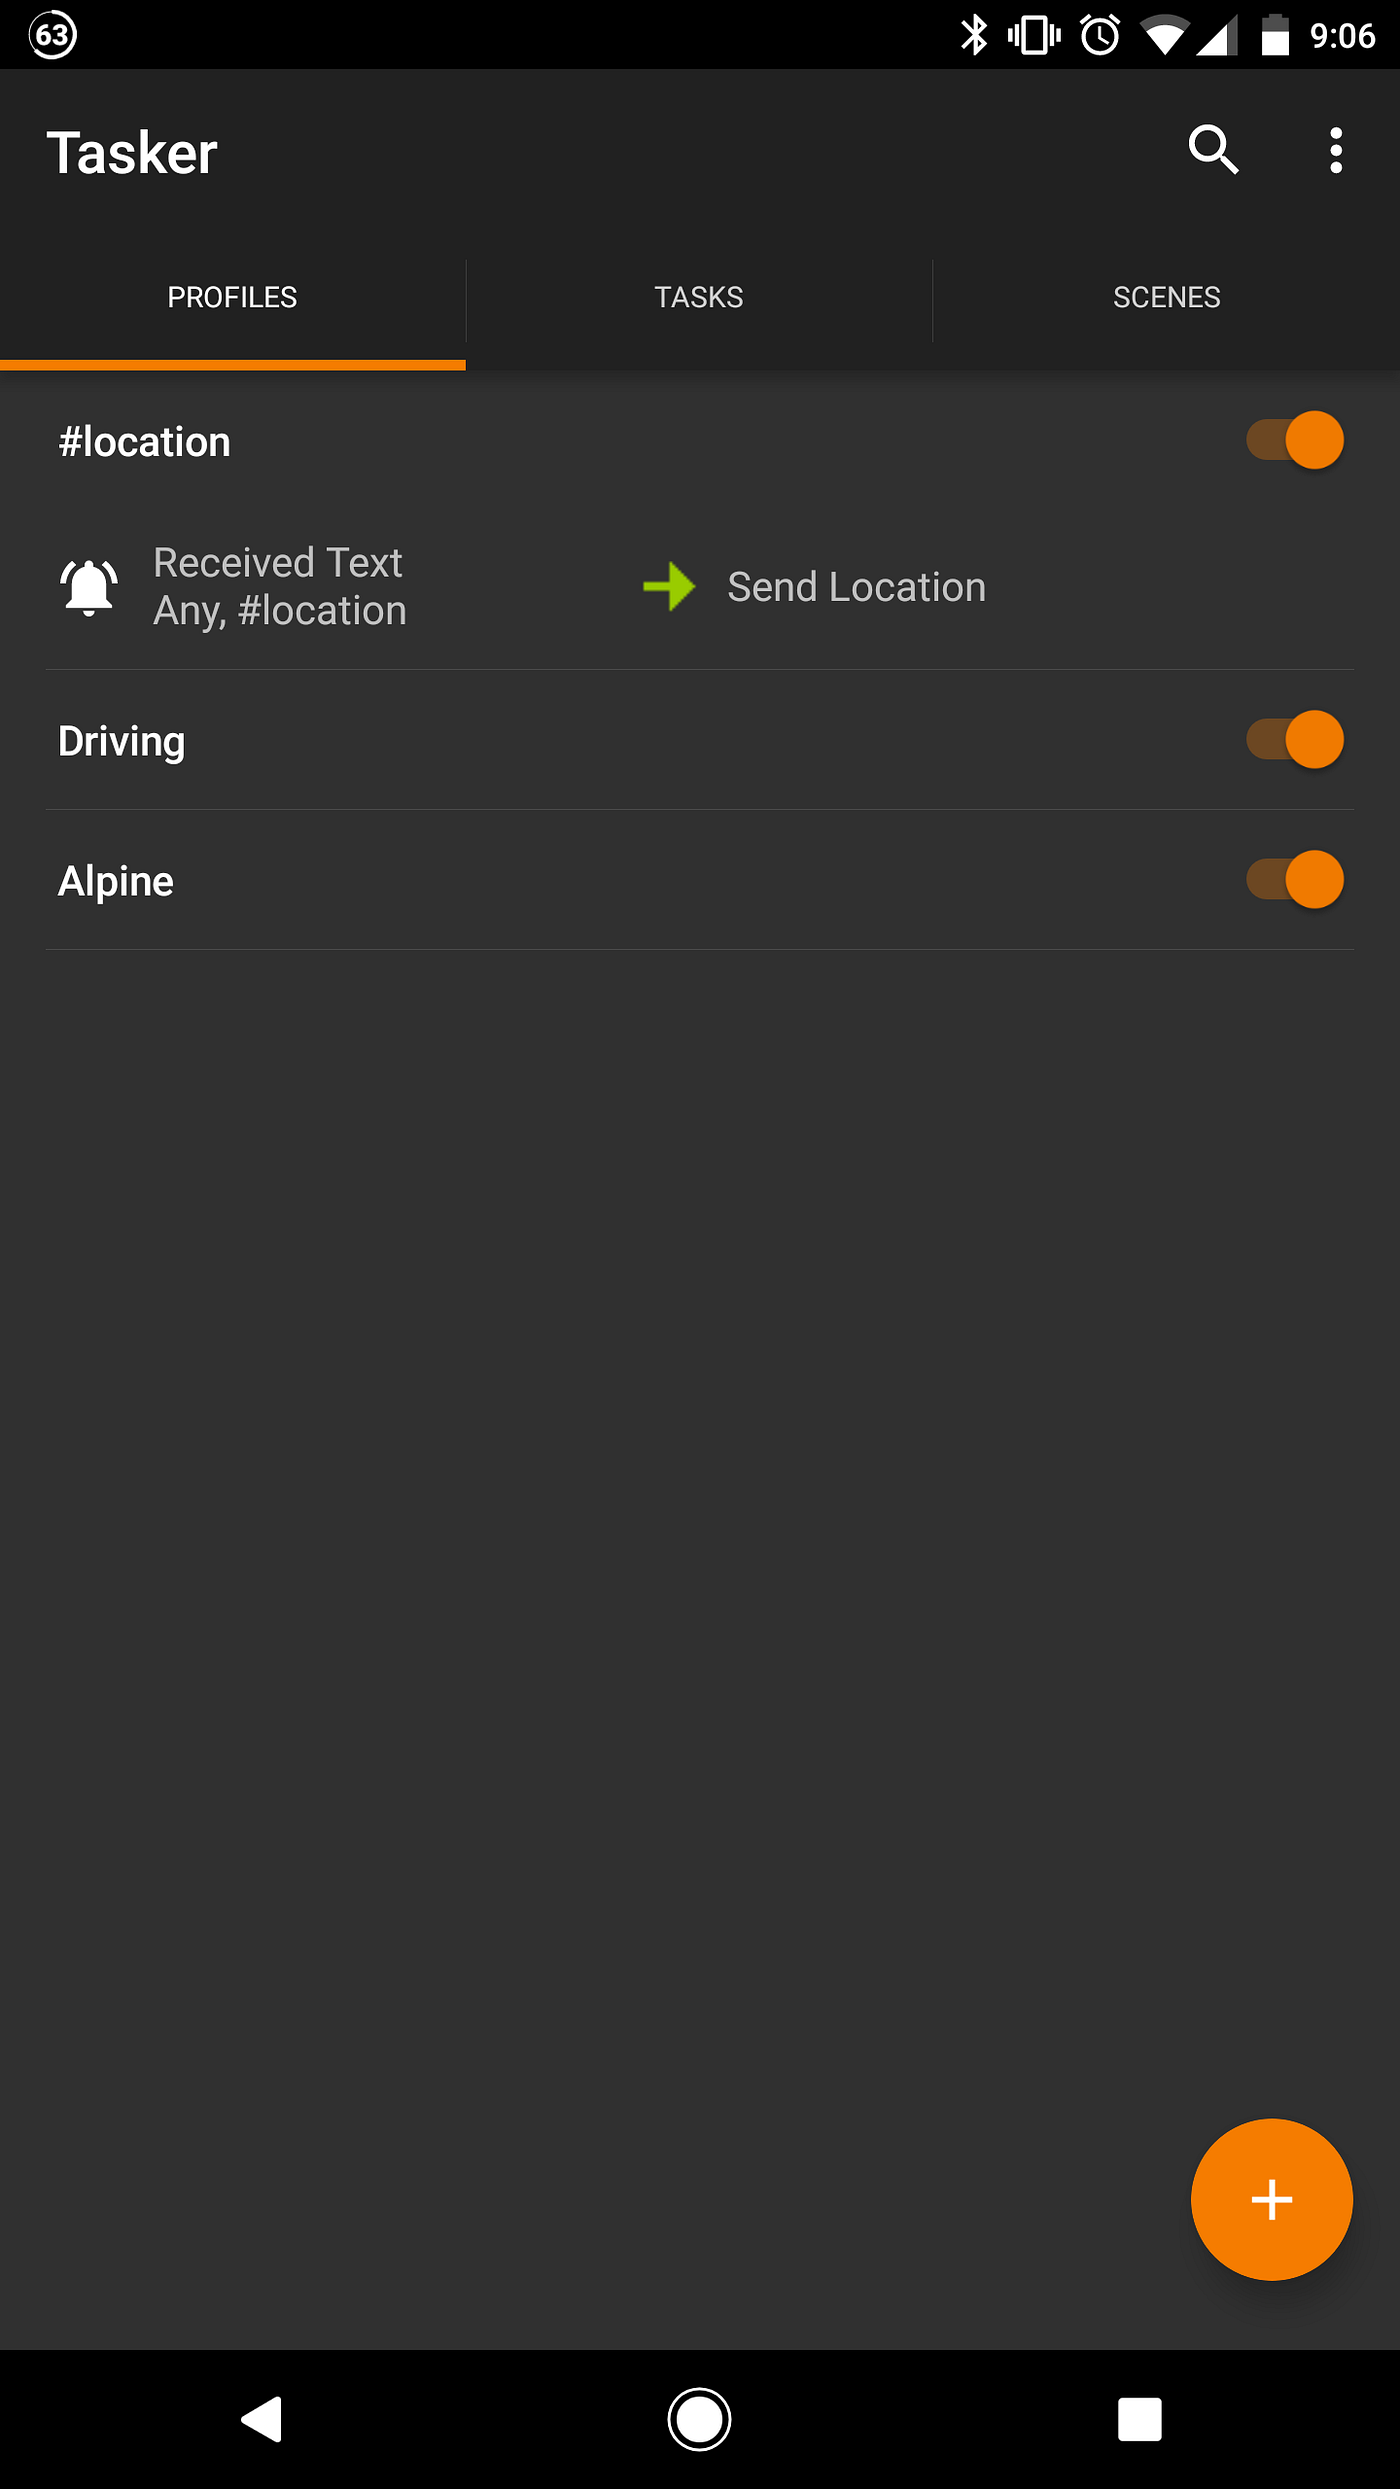 Android] Automatically sending your location with Tasker | by Raphael  Nguyen | Medium